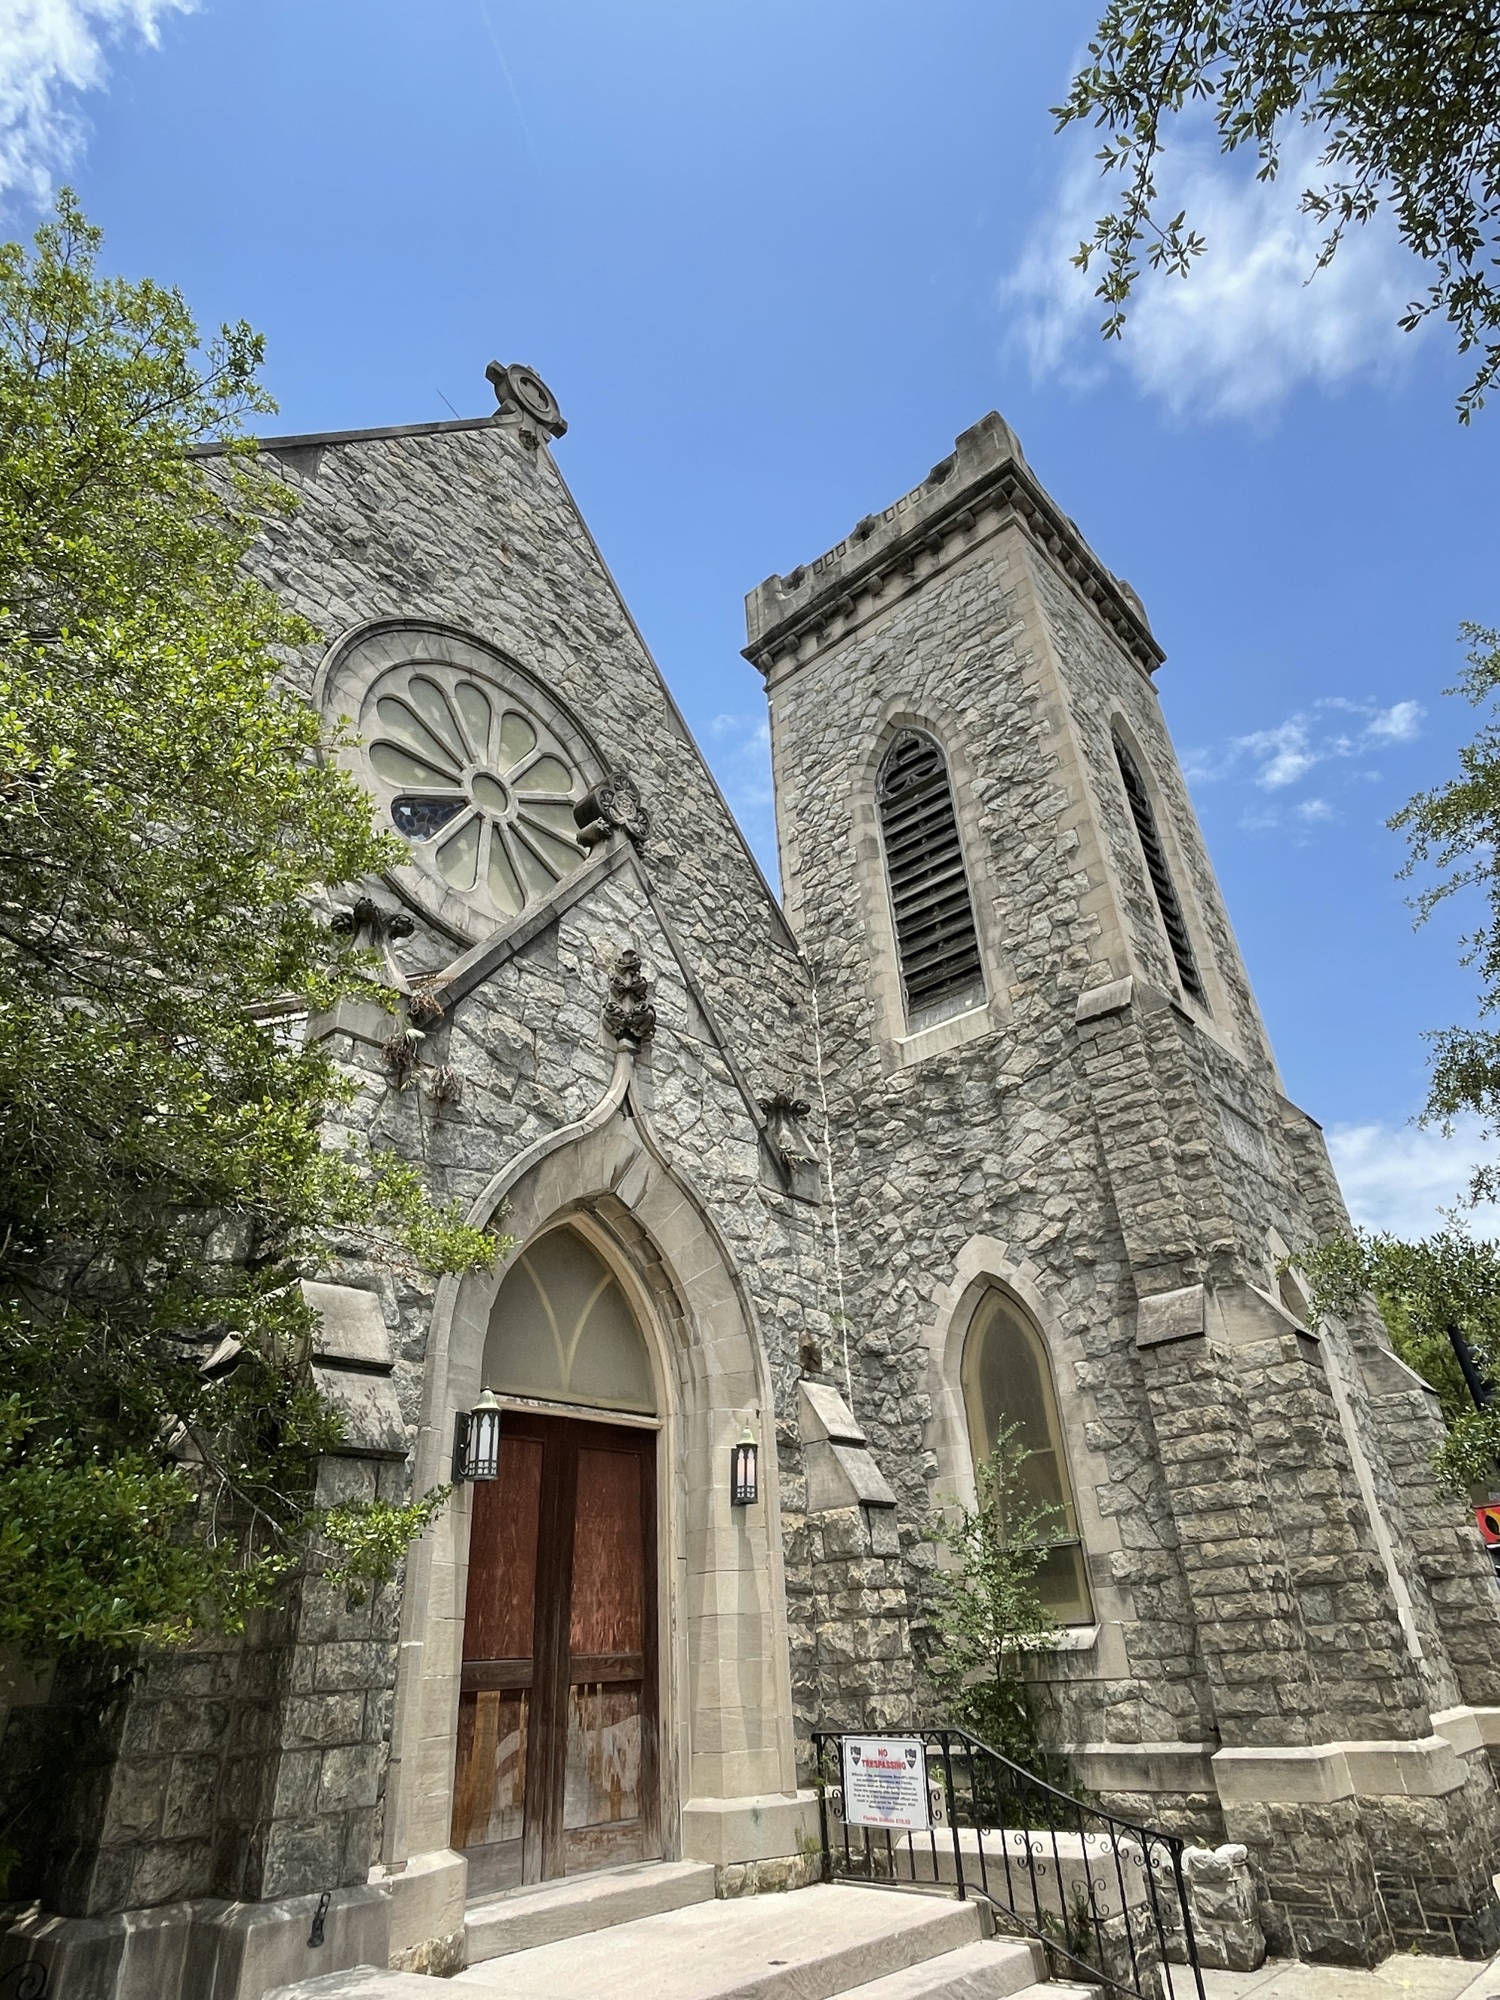 The 12,337-square-foot Gothic-style church was part of the first development wave Downtown after The Great Fire of 1901.